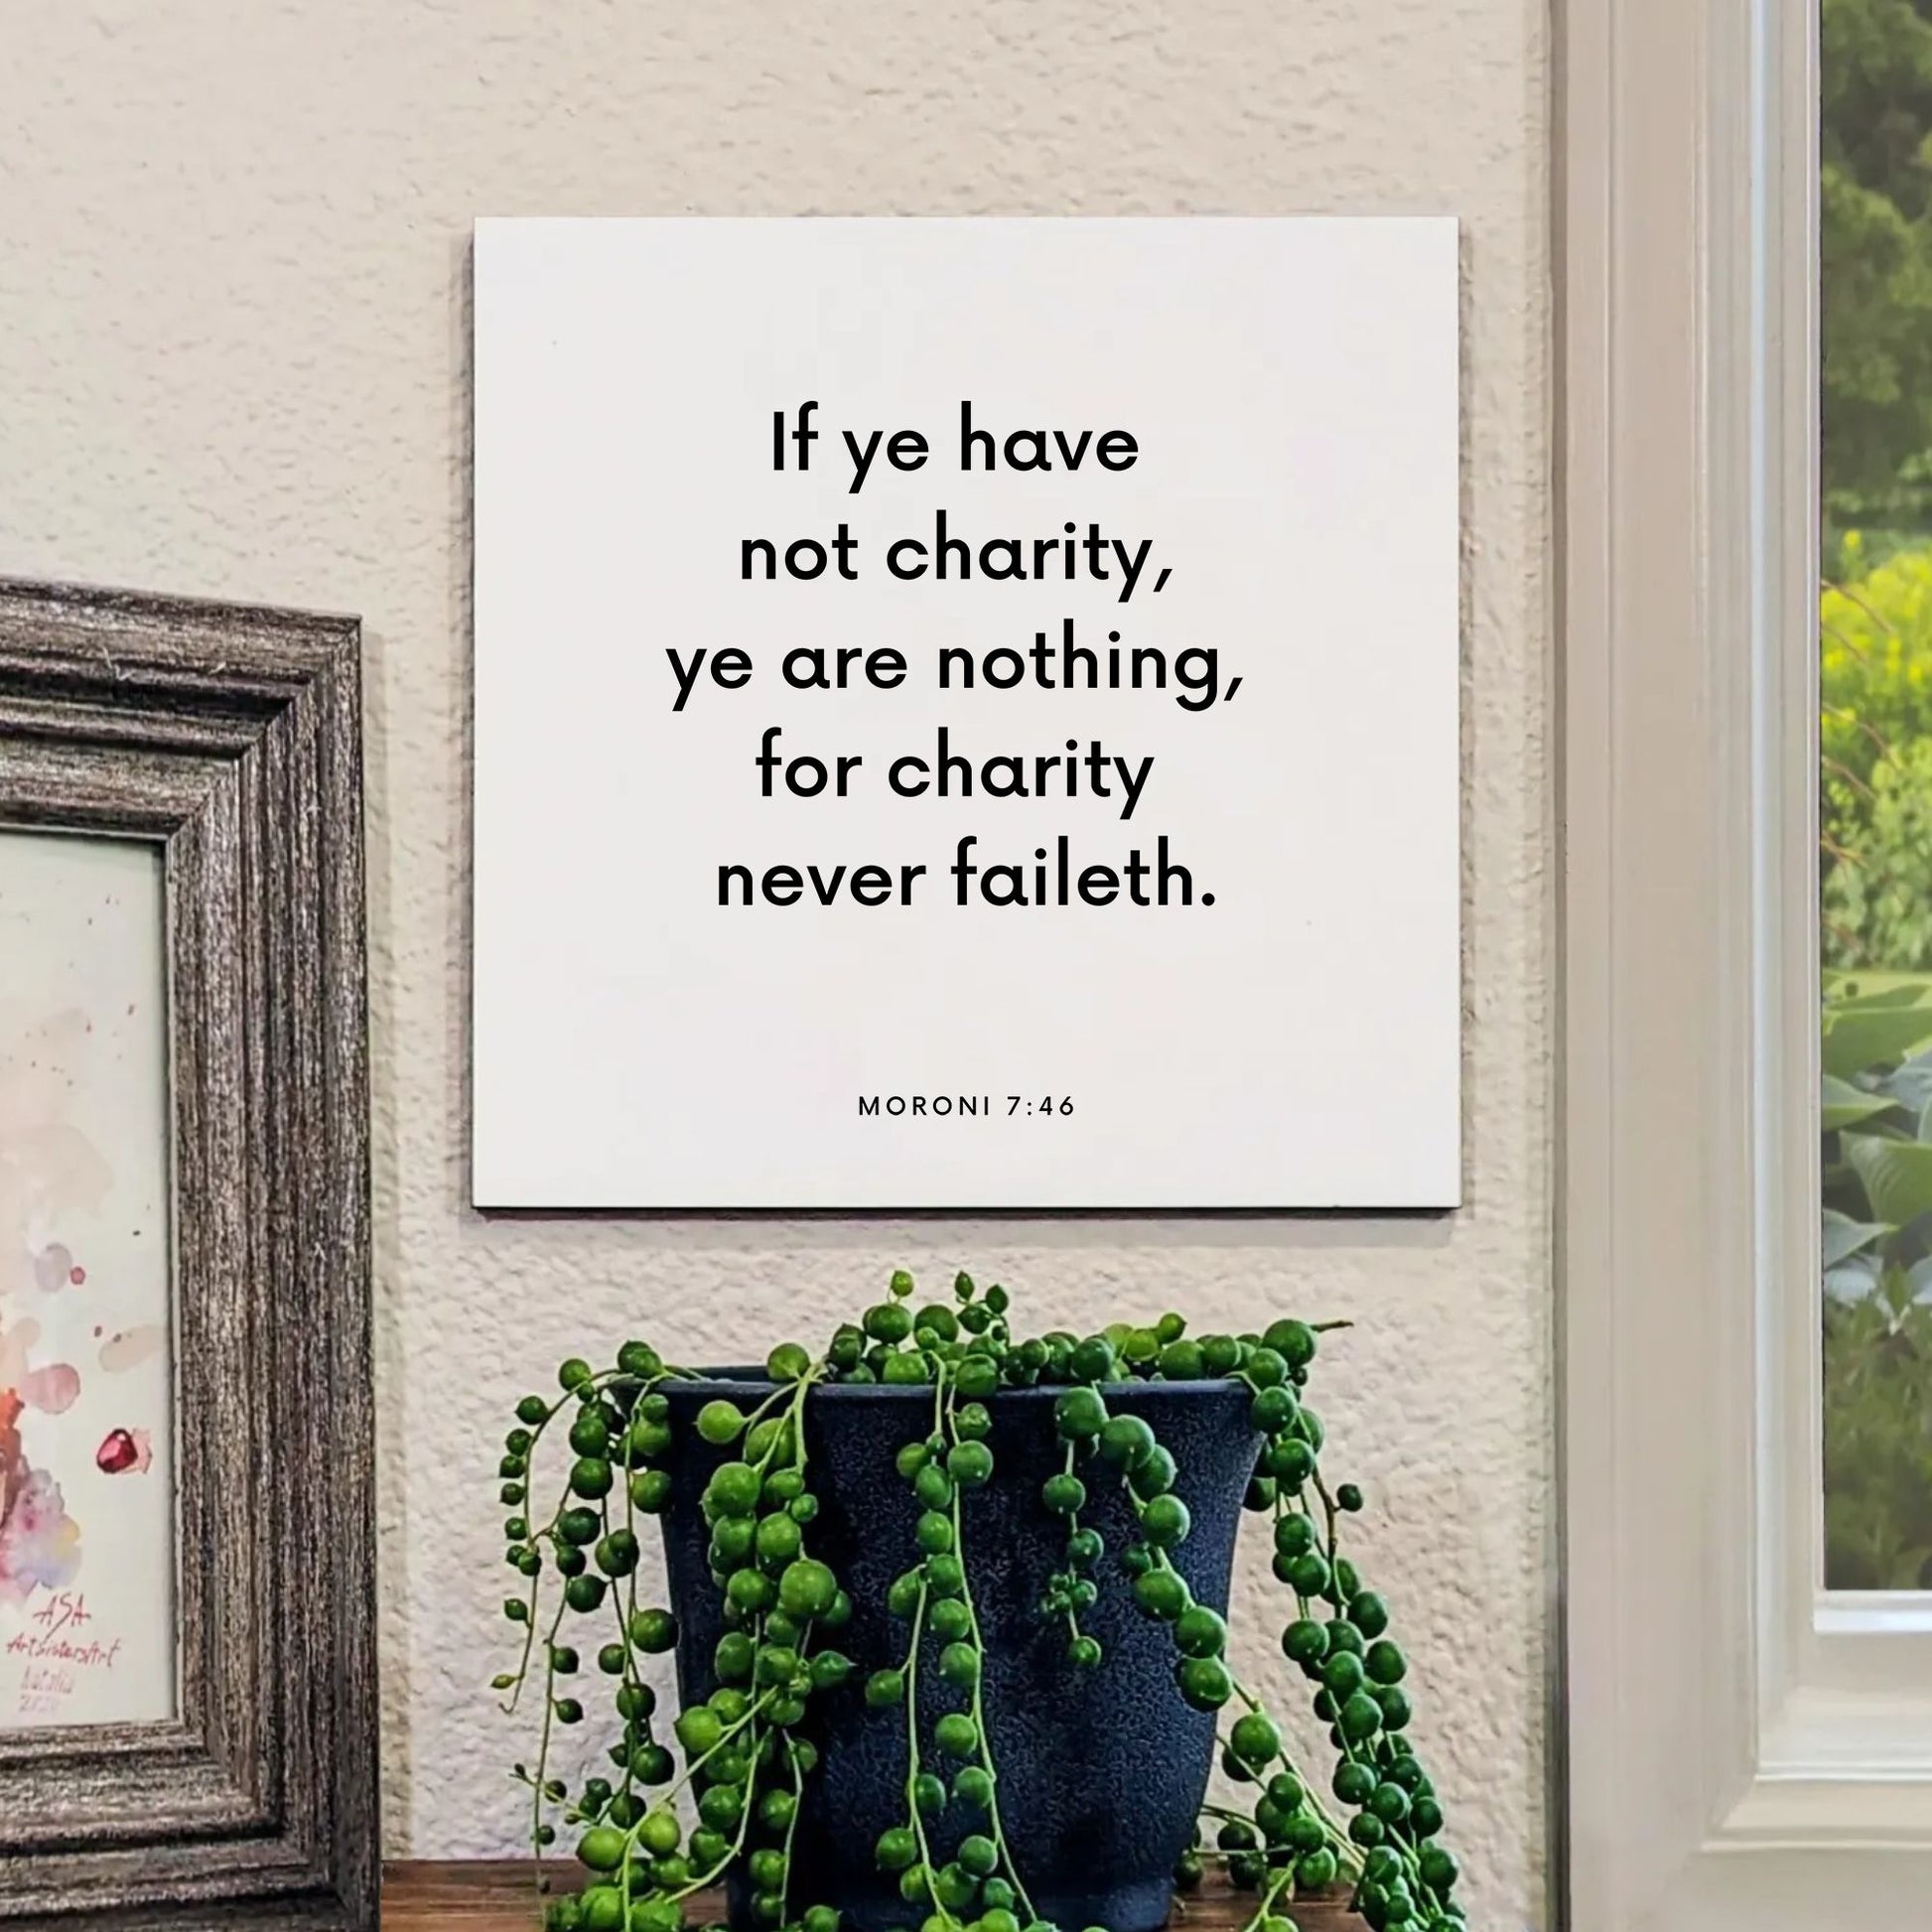 Window mouting of the scripture tile for Moroni 7:46 - "If ye have not charity, ye are nothing"